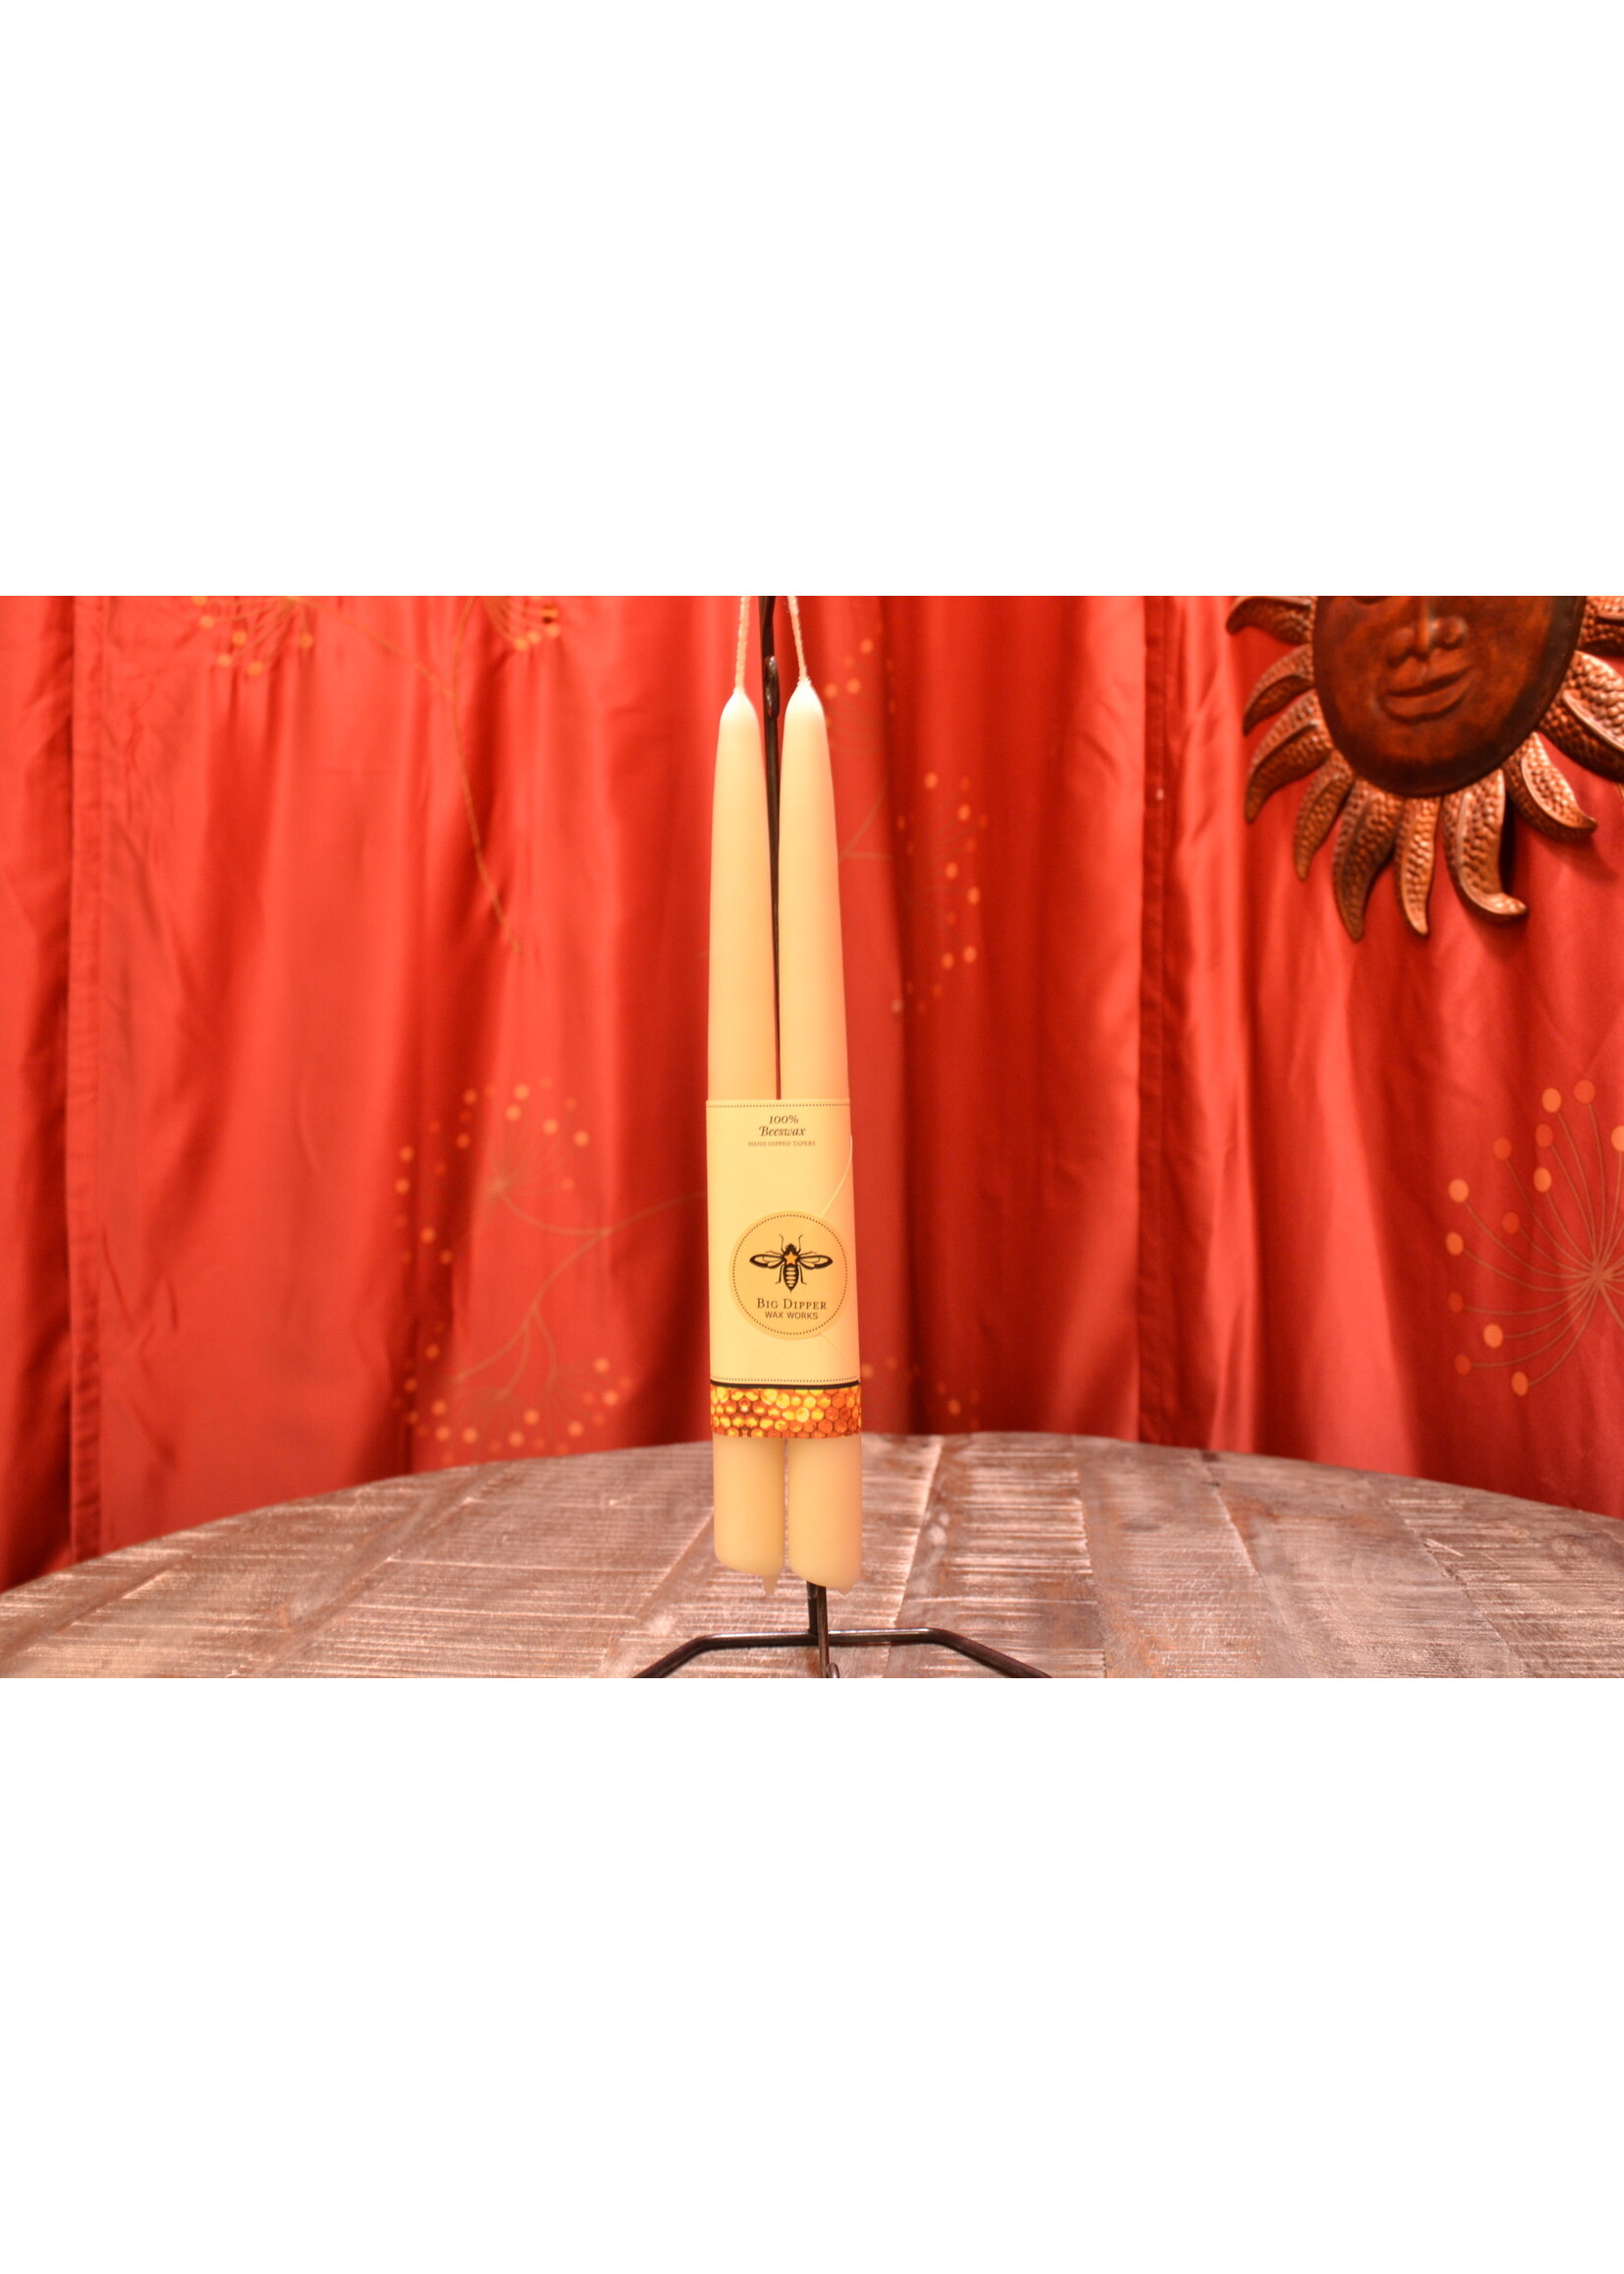 Beeswax Taper Candles Ivory/White